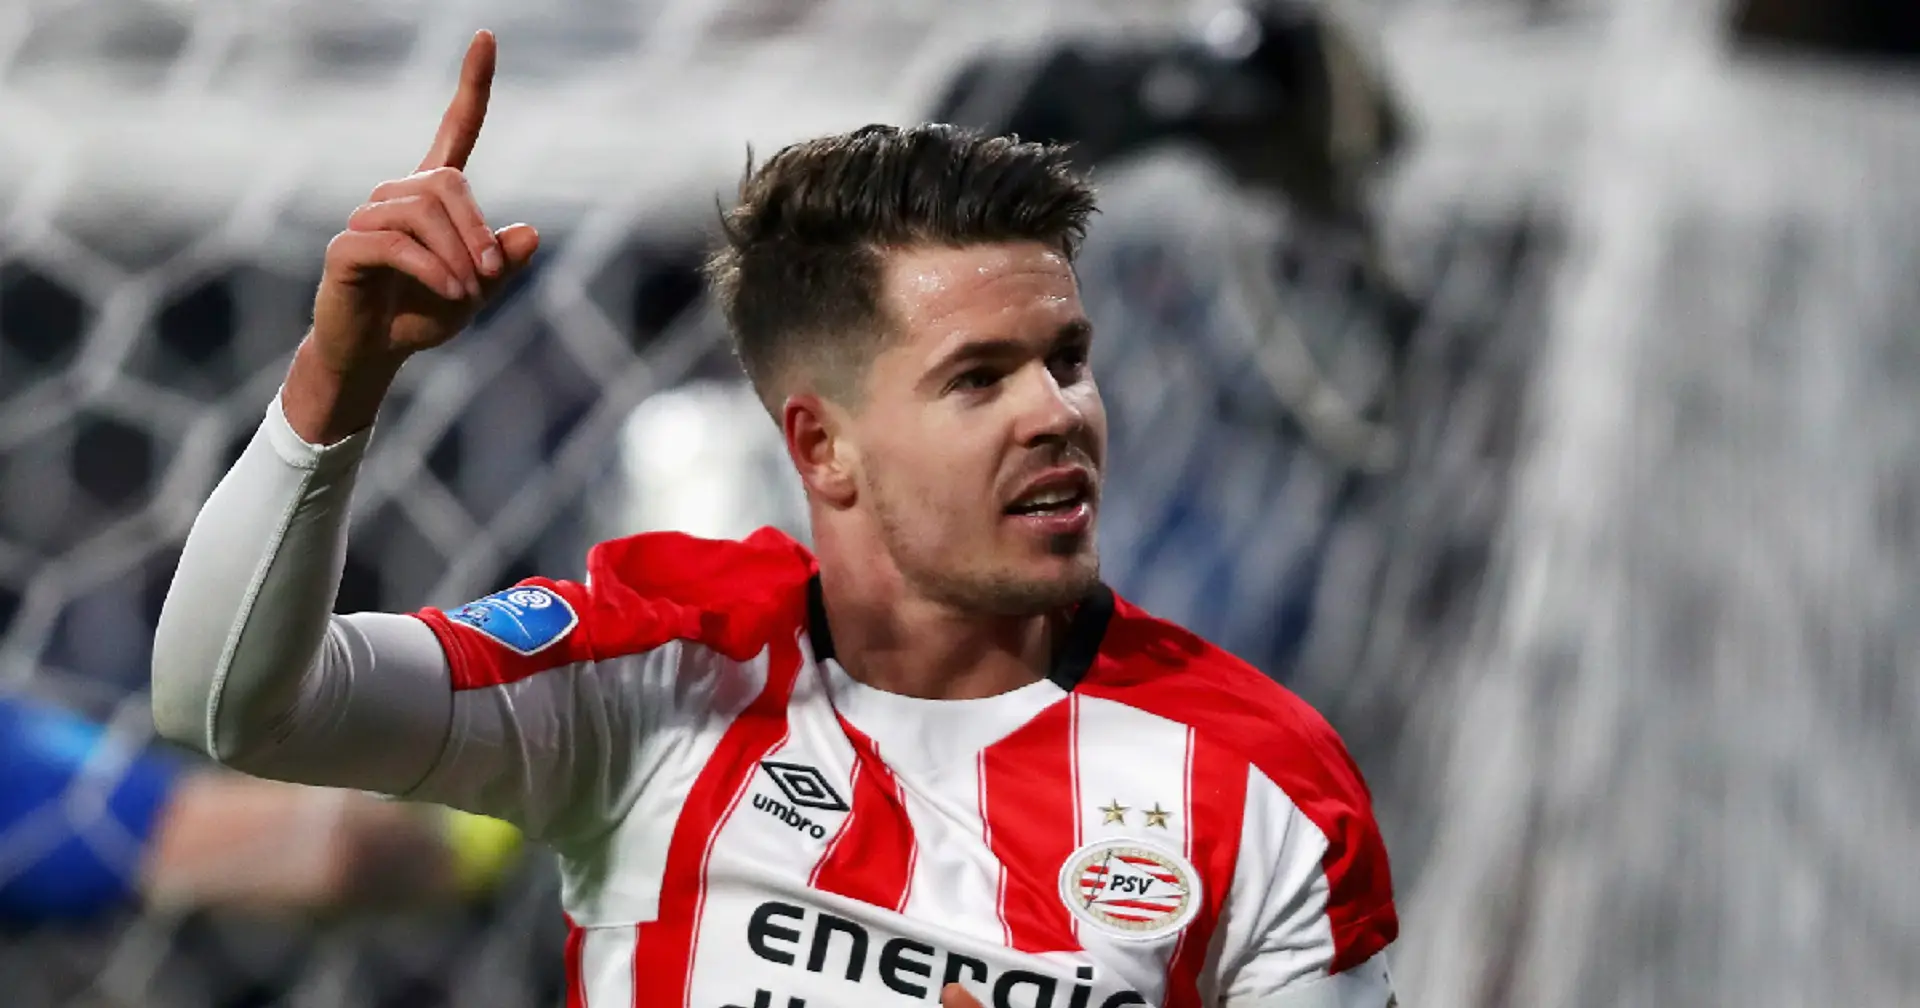 Chelsea loanee Van Ginkel opens up about horror ligament injury that has kept him out for 2 years